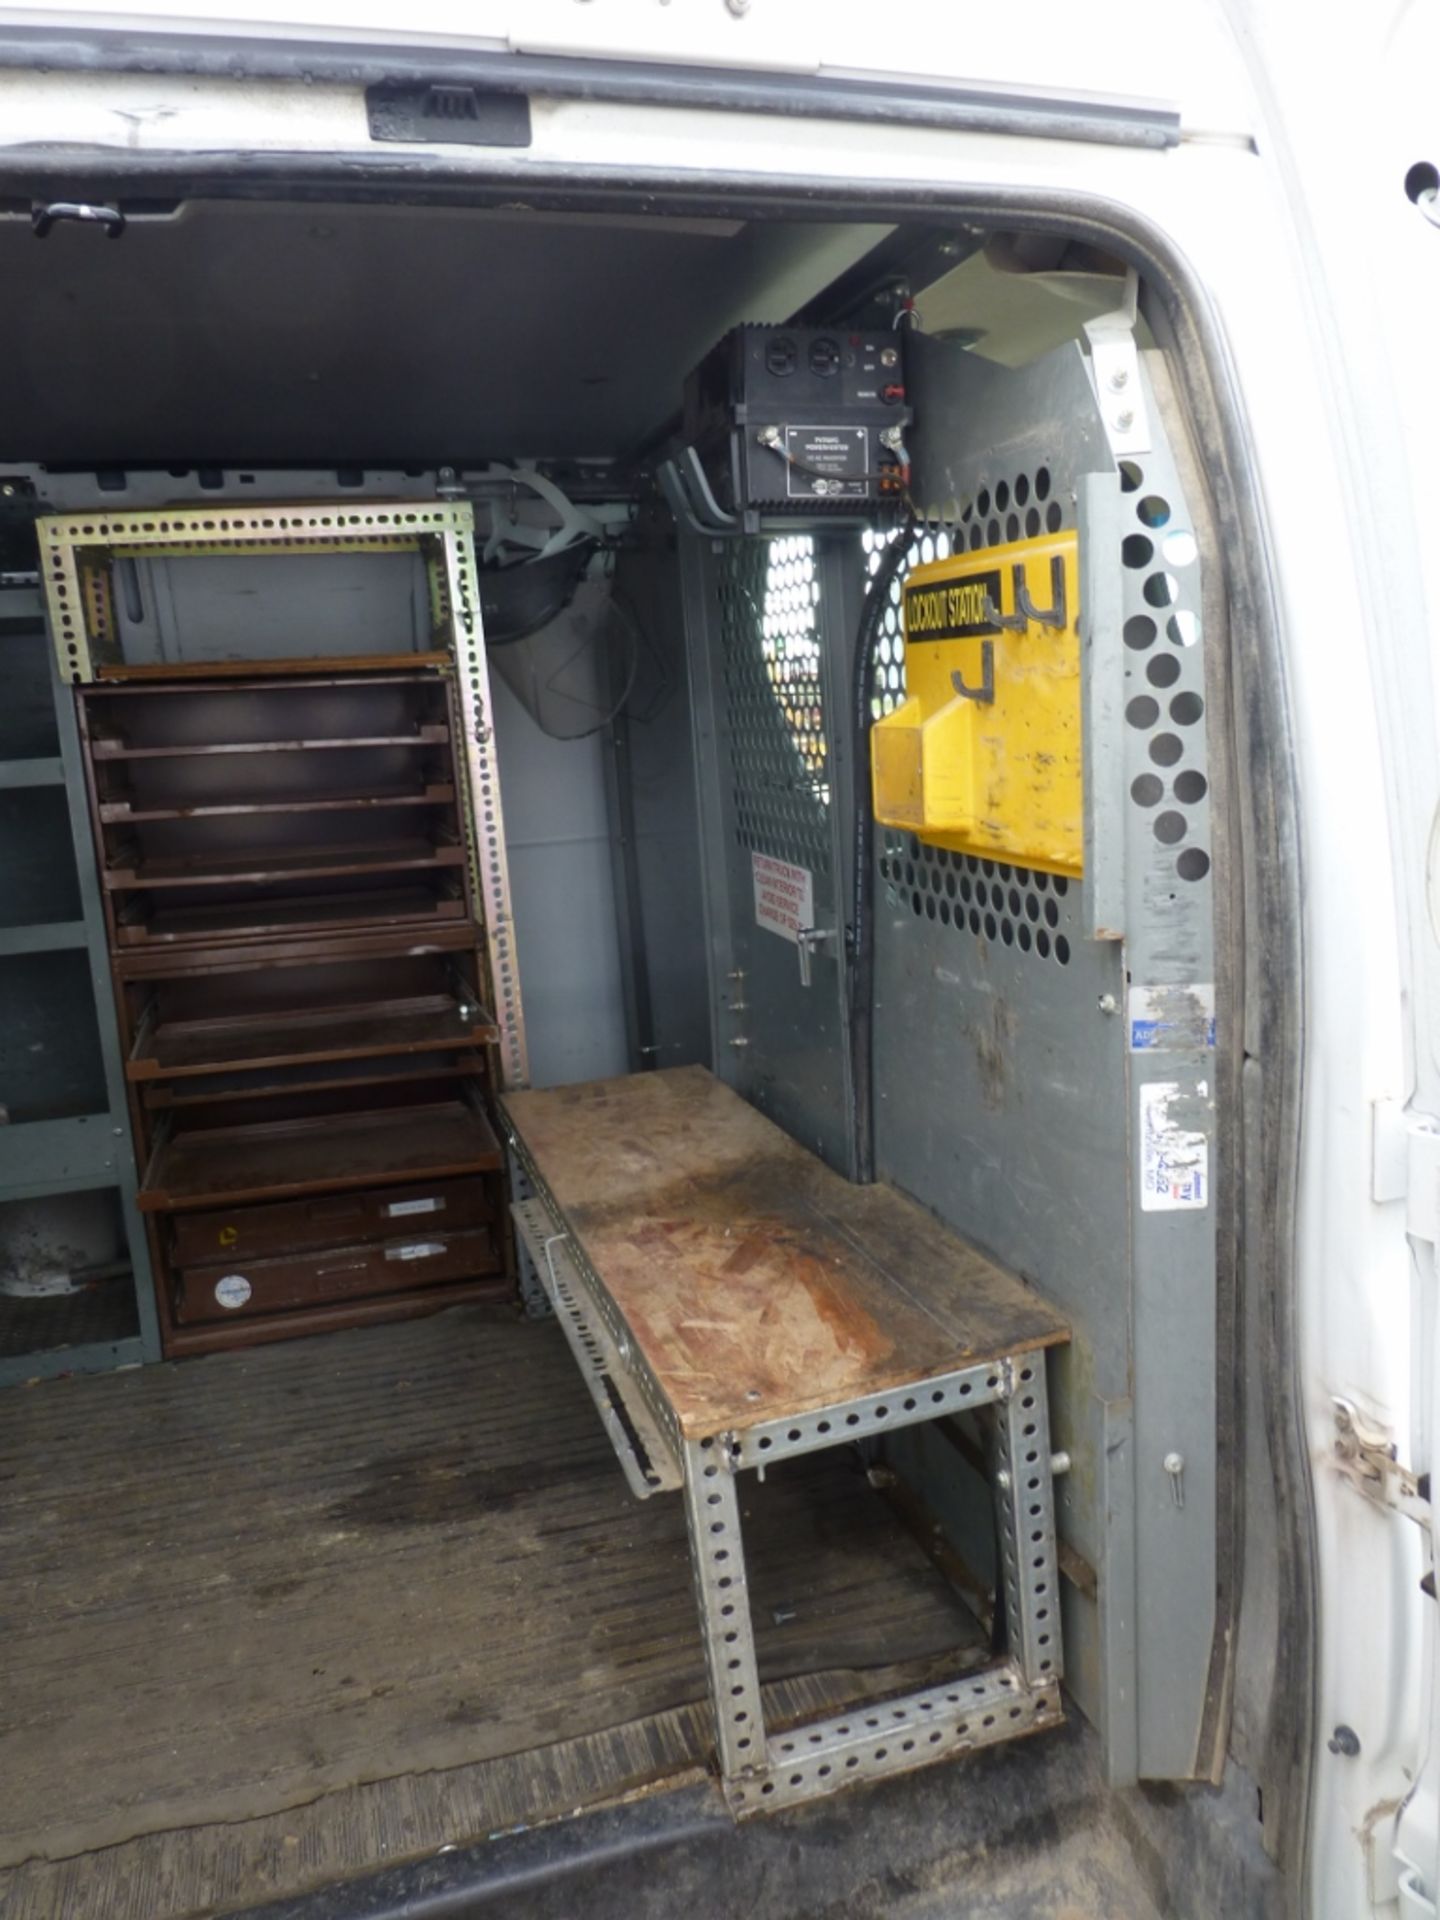 2008 GMC Cargo van, with shelf drawer units, automatic, a.c., manual windows, 254,605 unverified - Image 6 of 22